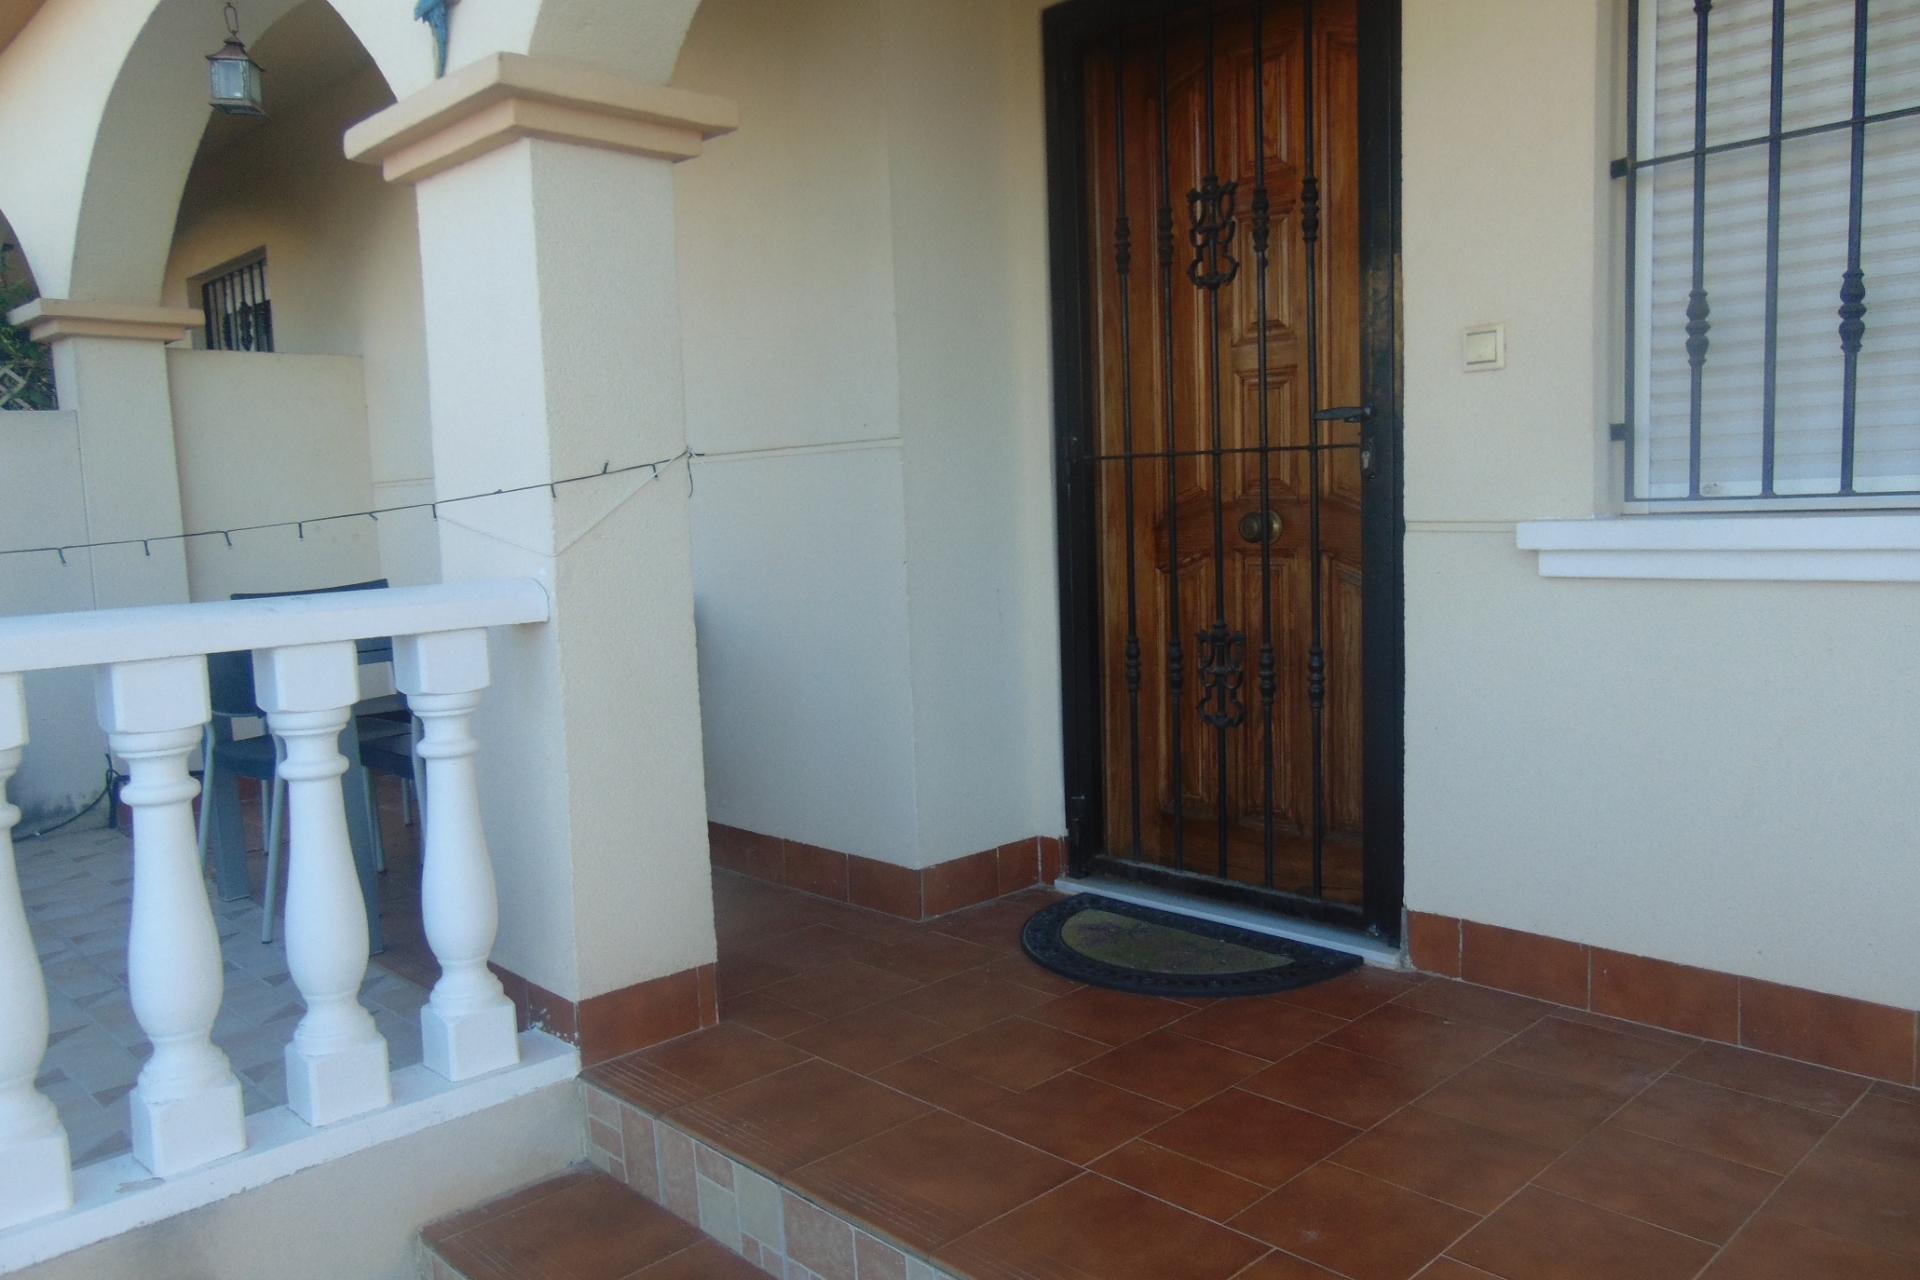 Archived - Townhouse for sale - Algorfa - Lo Crispin